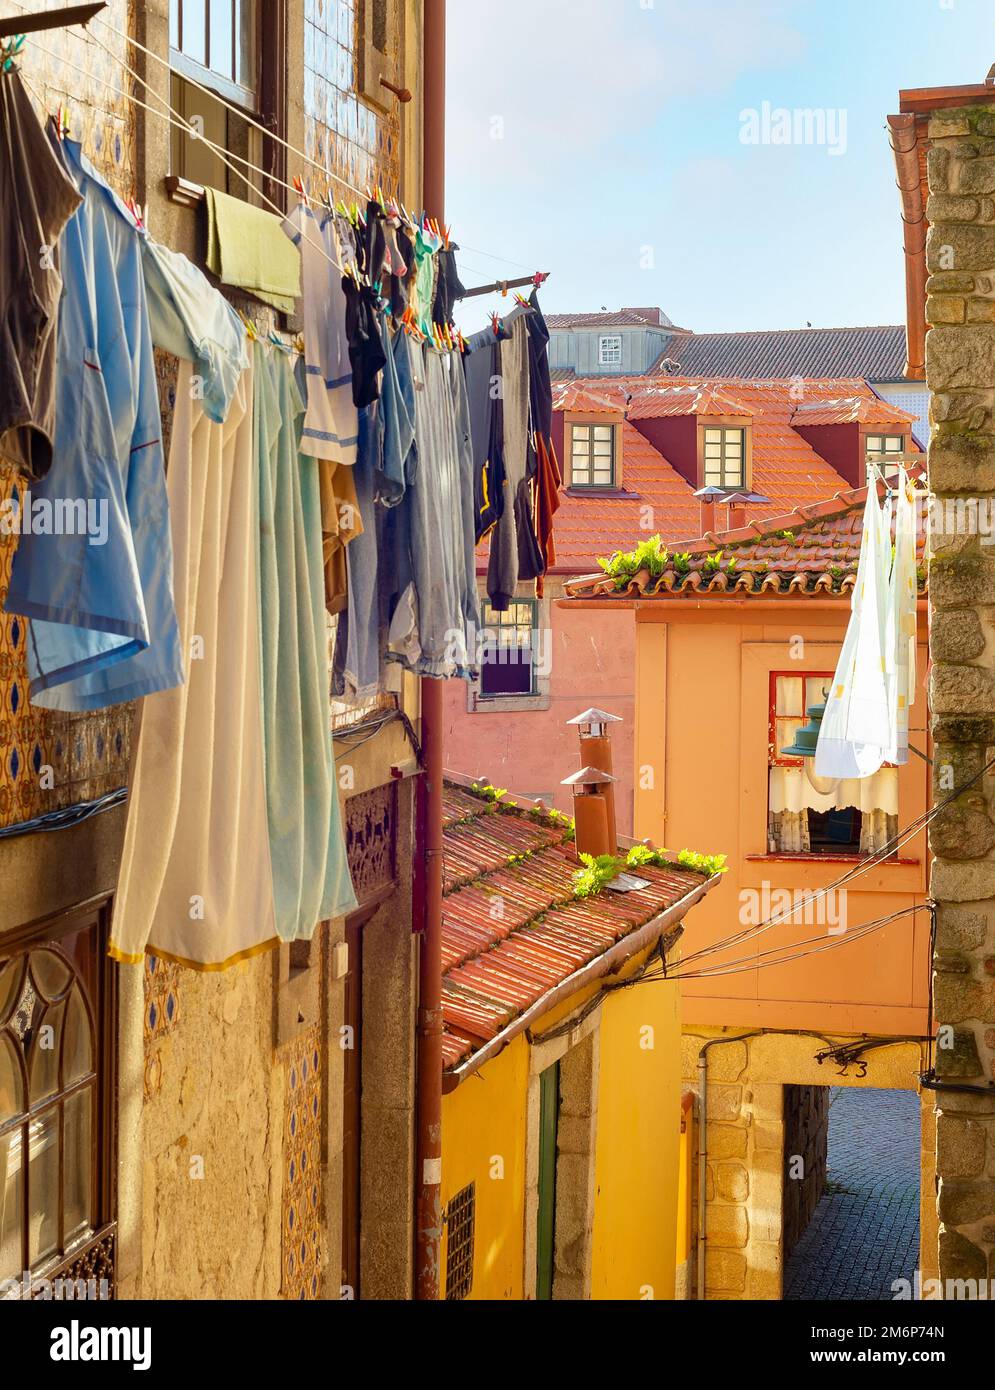 Clothes drying Porto street Portugal Stock Photo